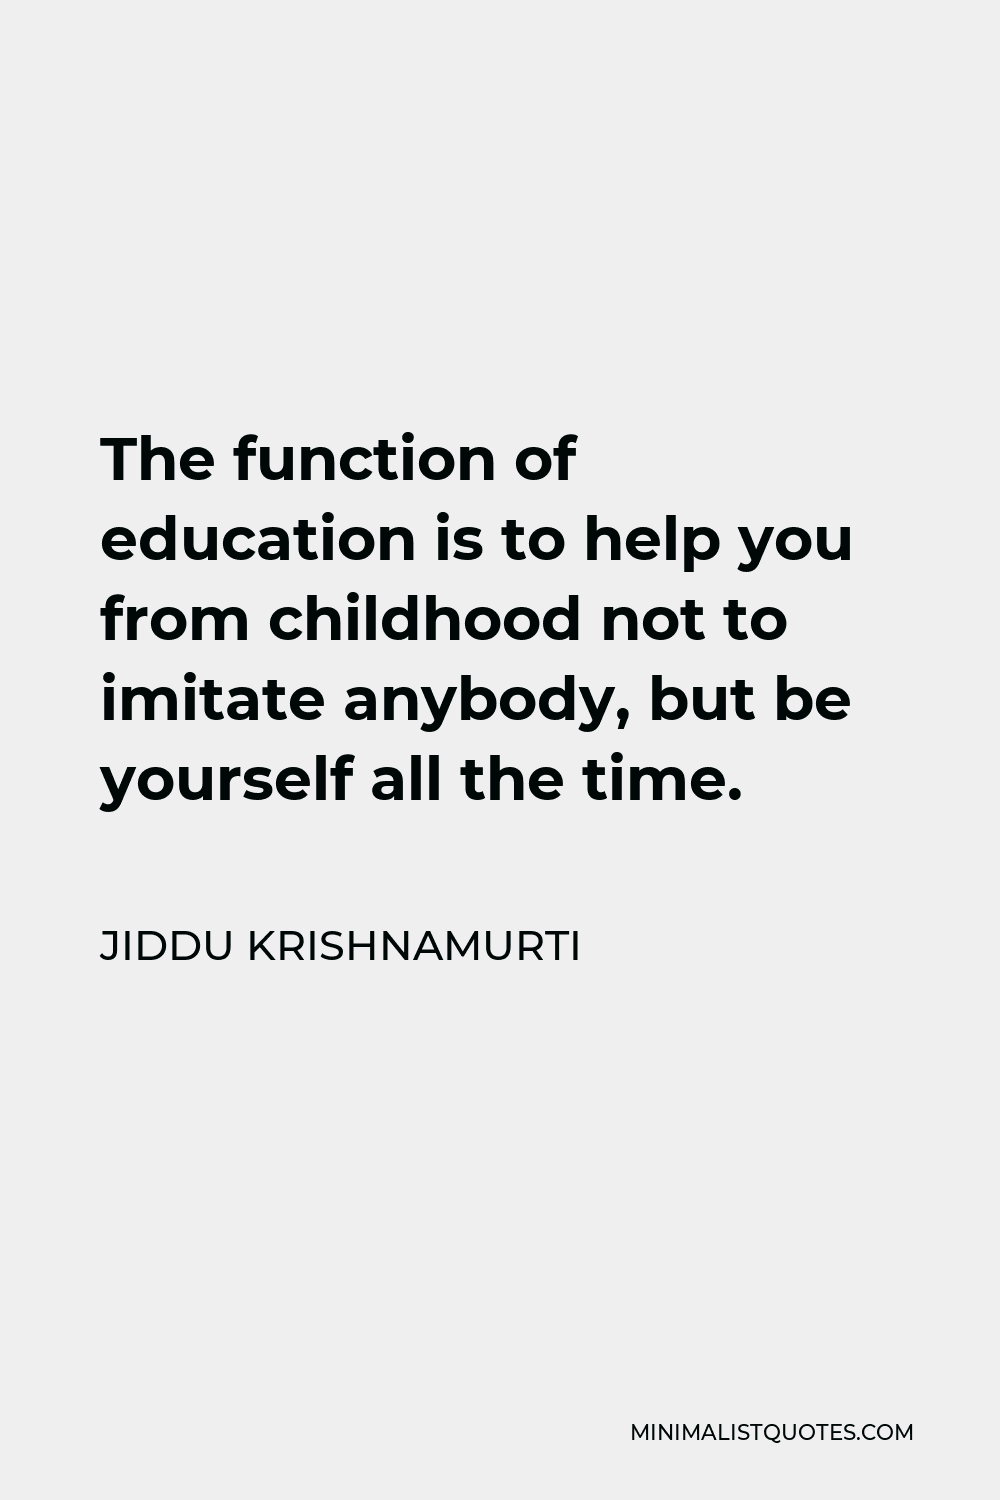 Jiddu Krishnamurti Quote - The function of education is to help you from childhood not to imitate anybody, but be yourself all the time.